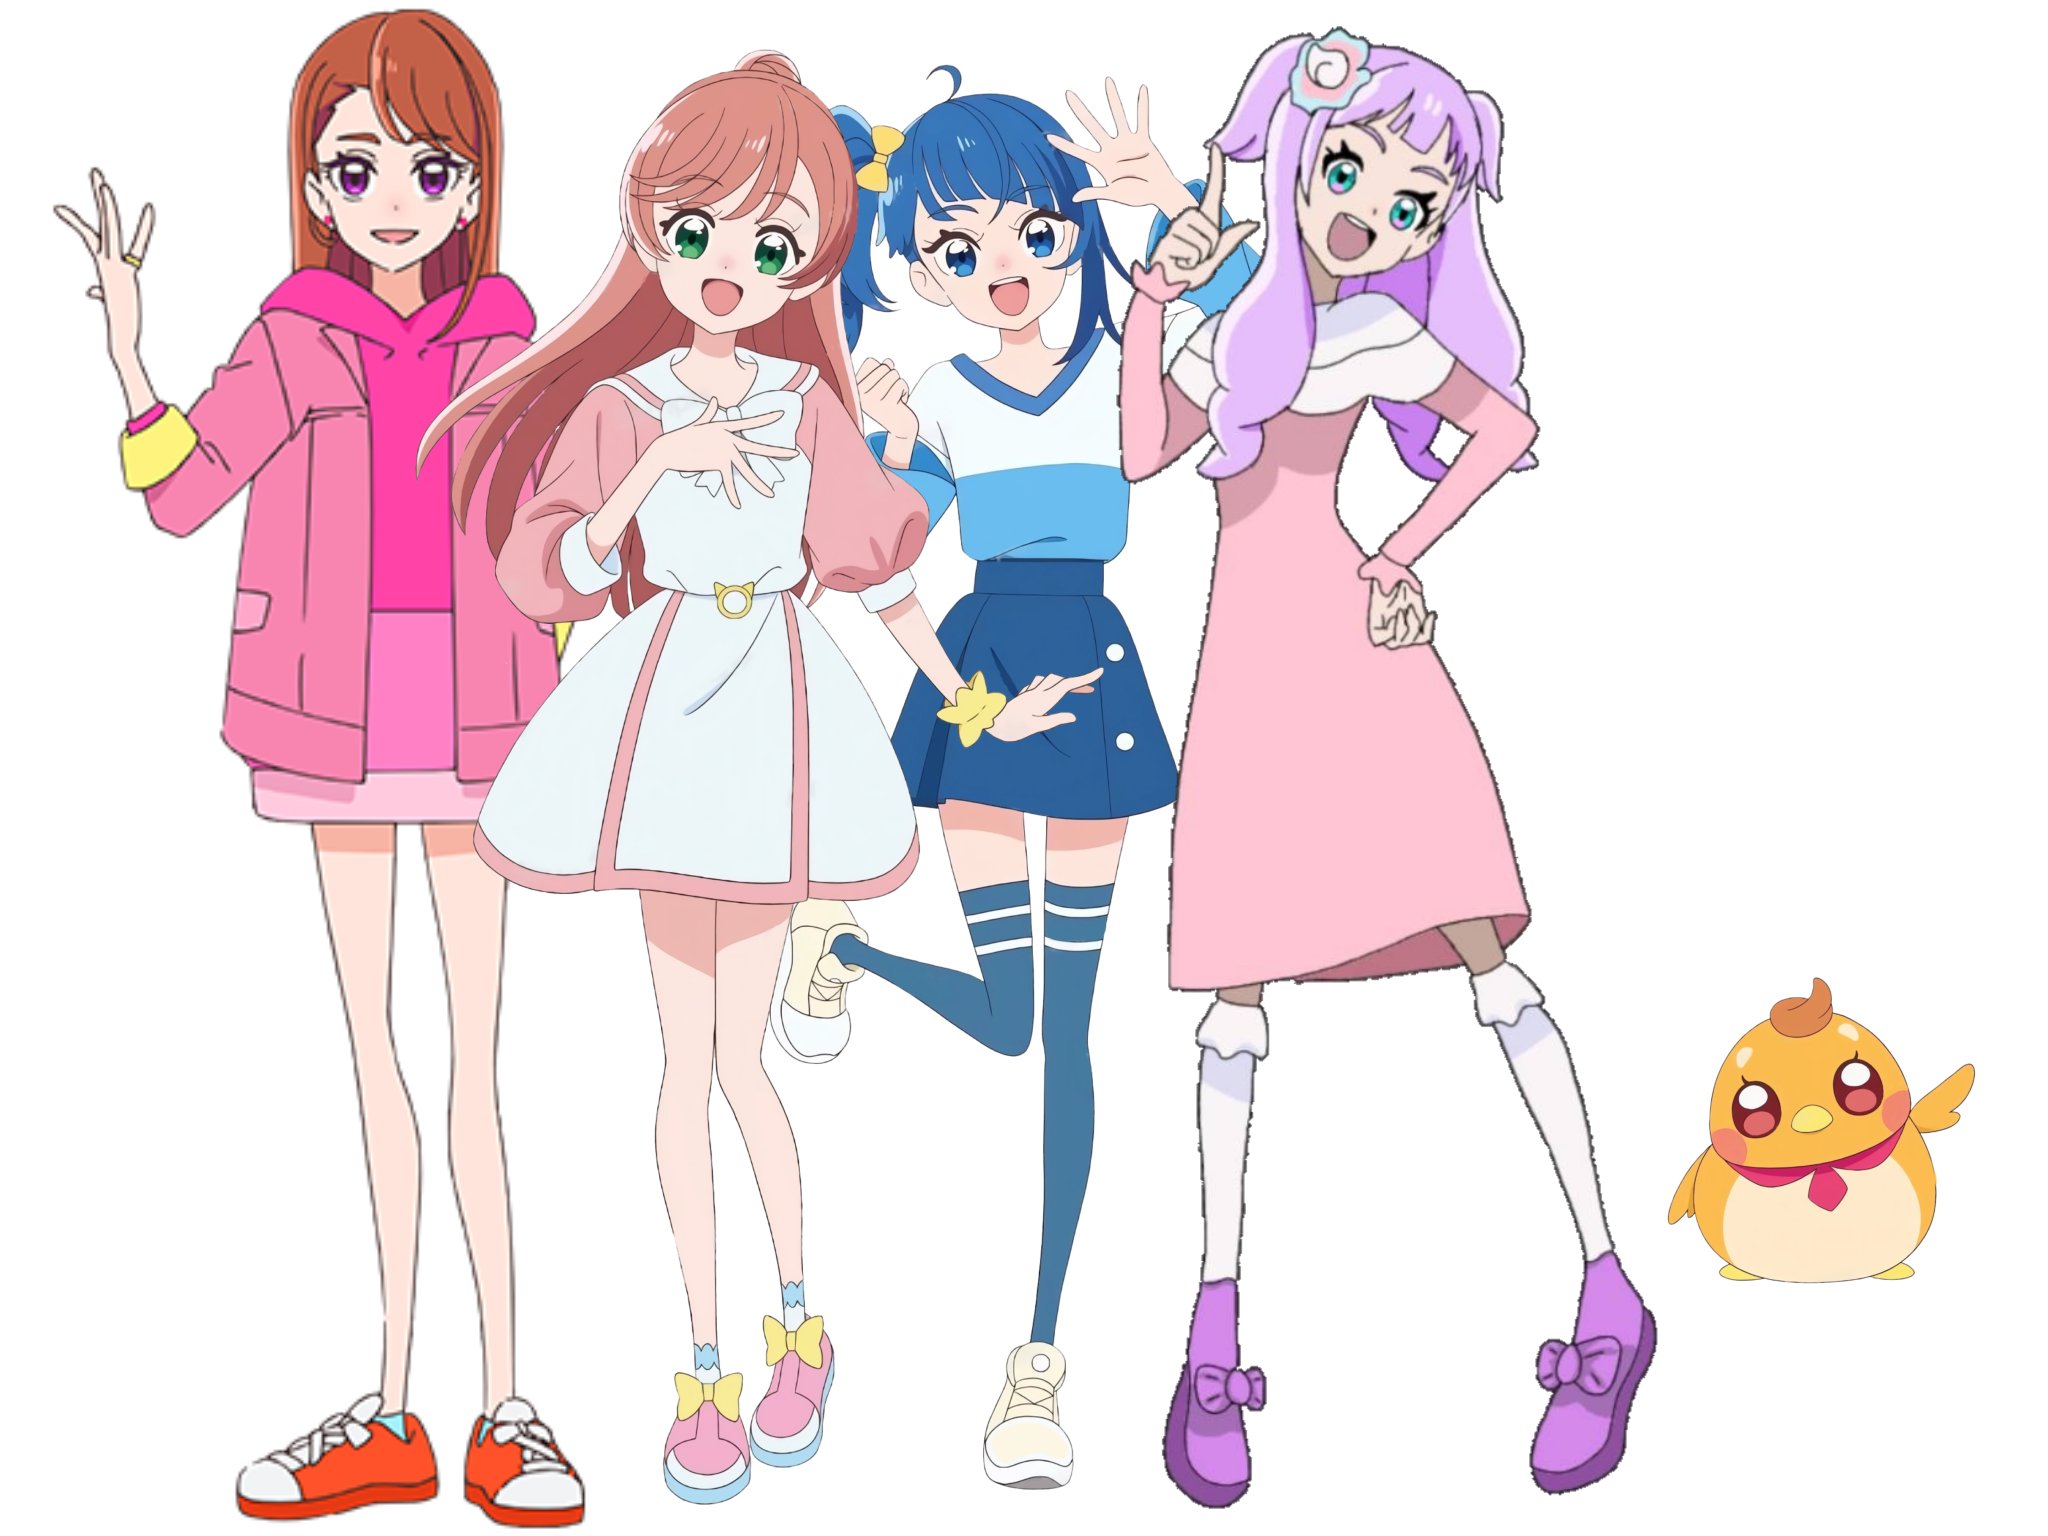 KuroYami on X: Precure 2023 be like (this is just for fun lol